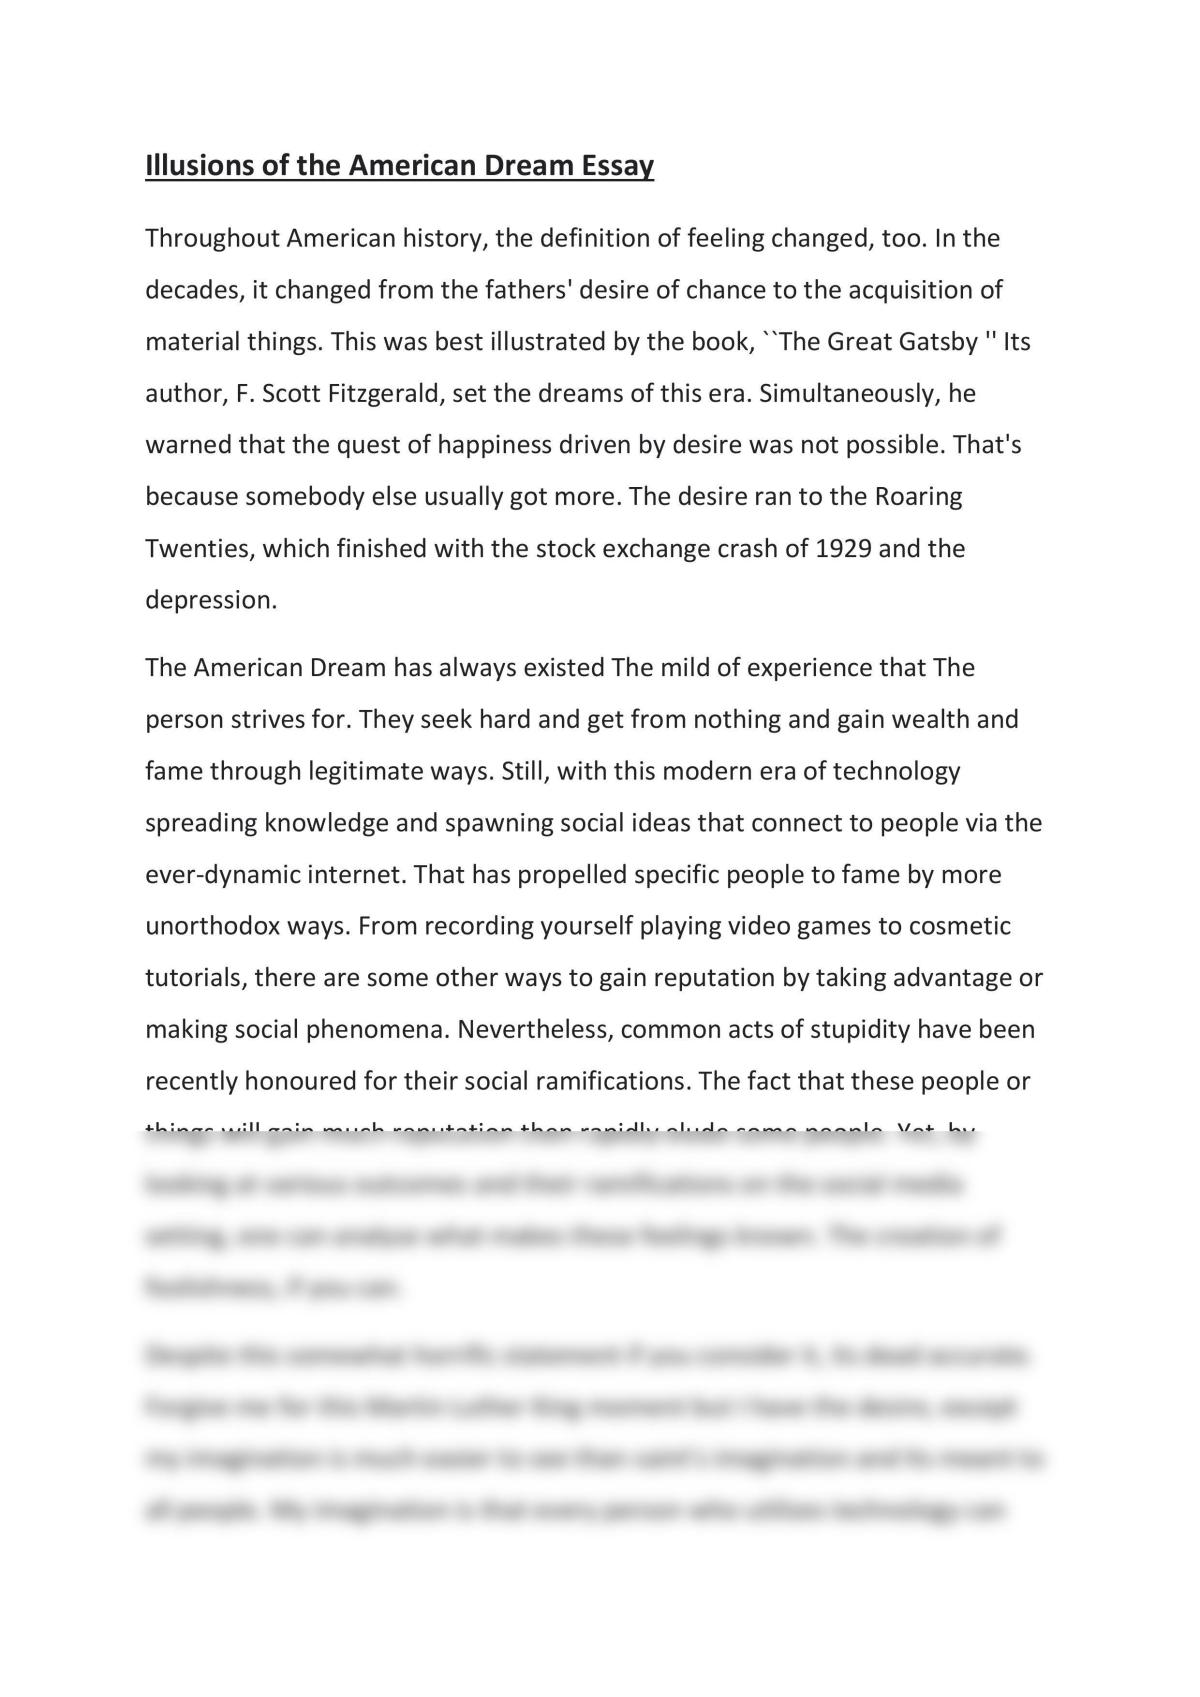 Illusions of the American Dream Essay - Page 1